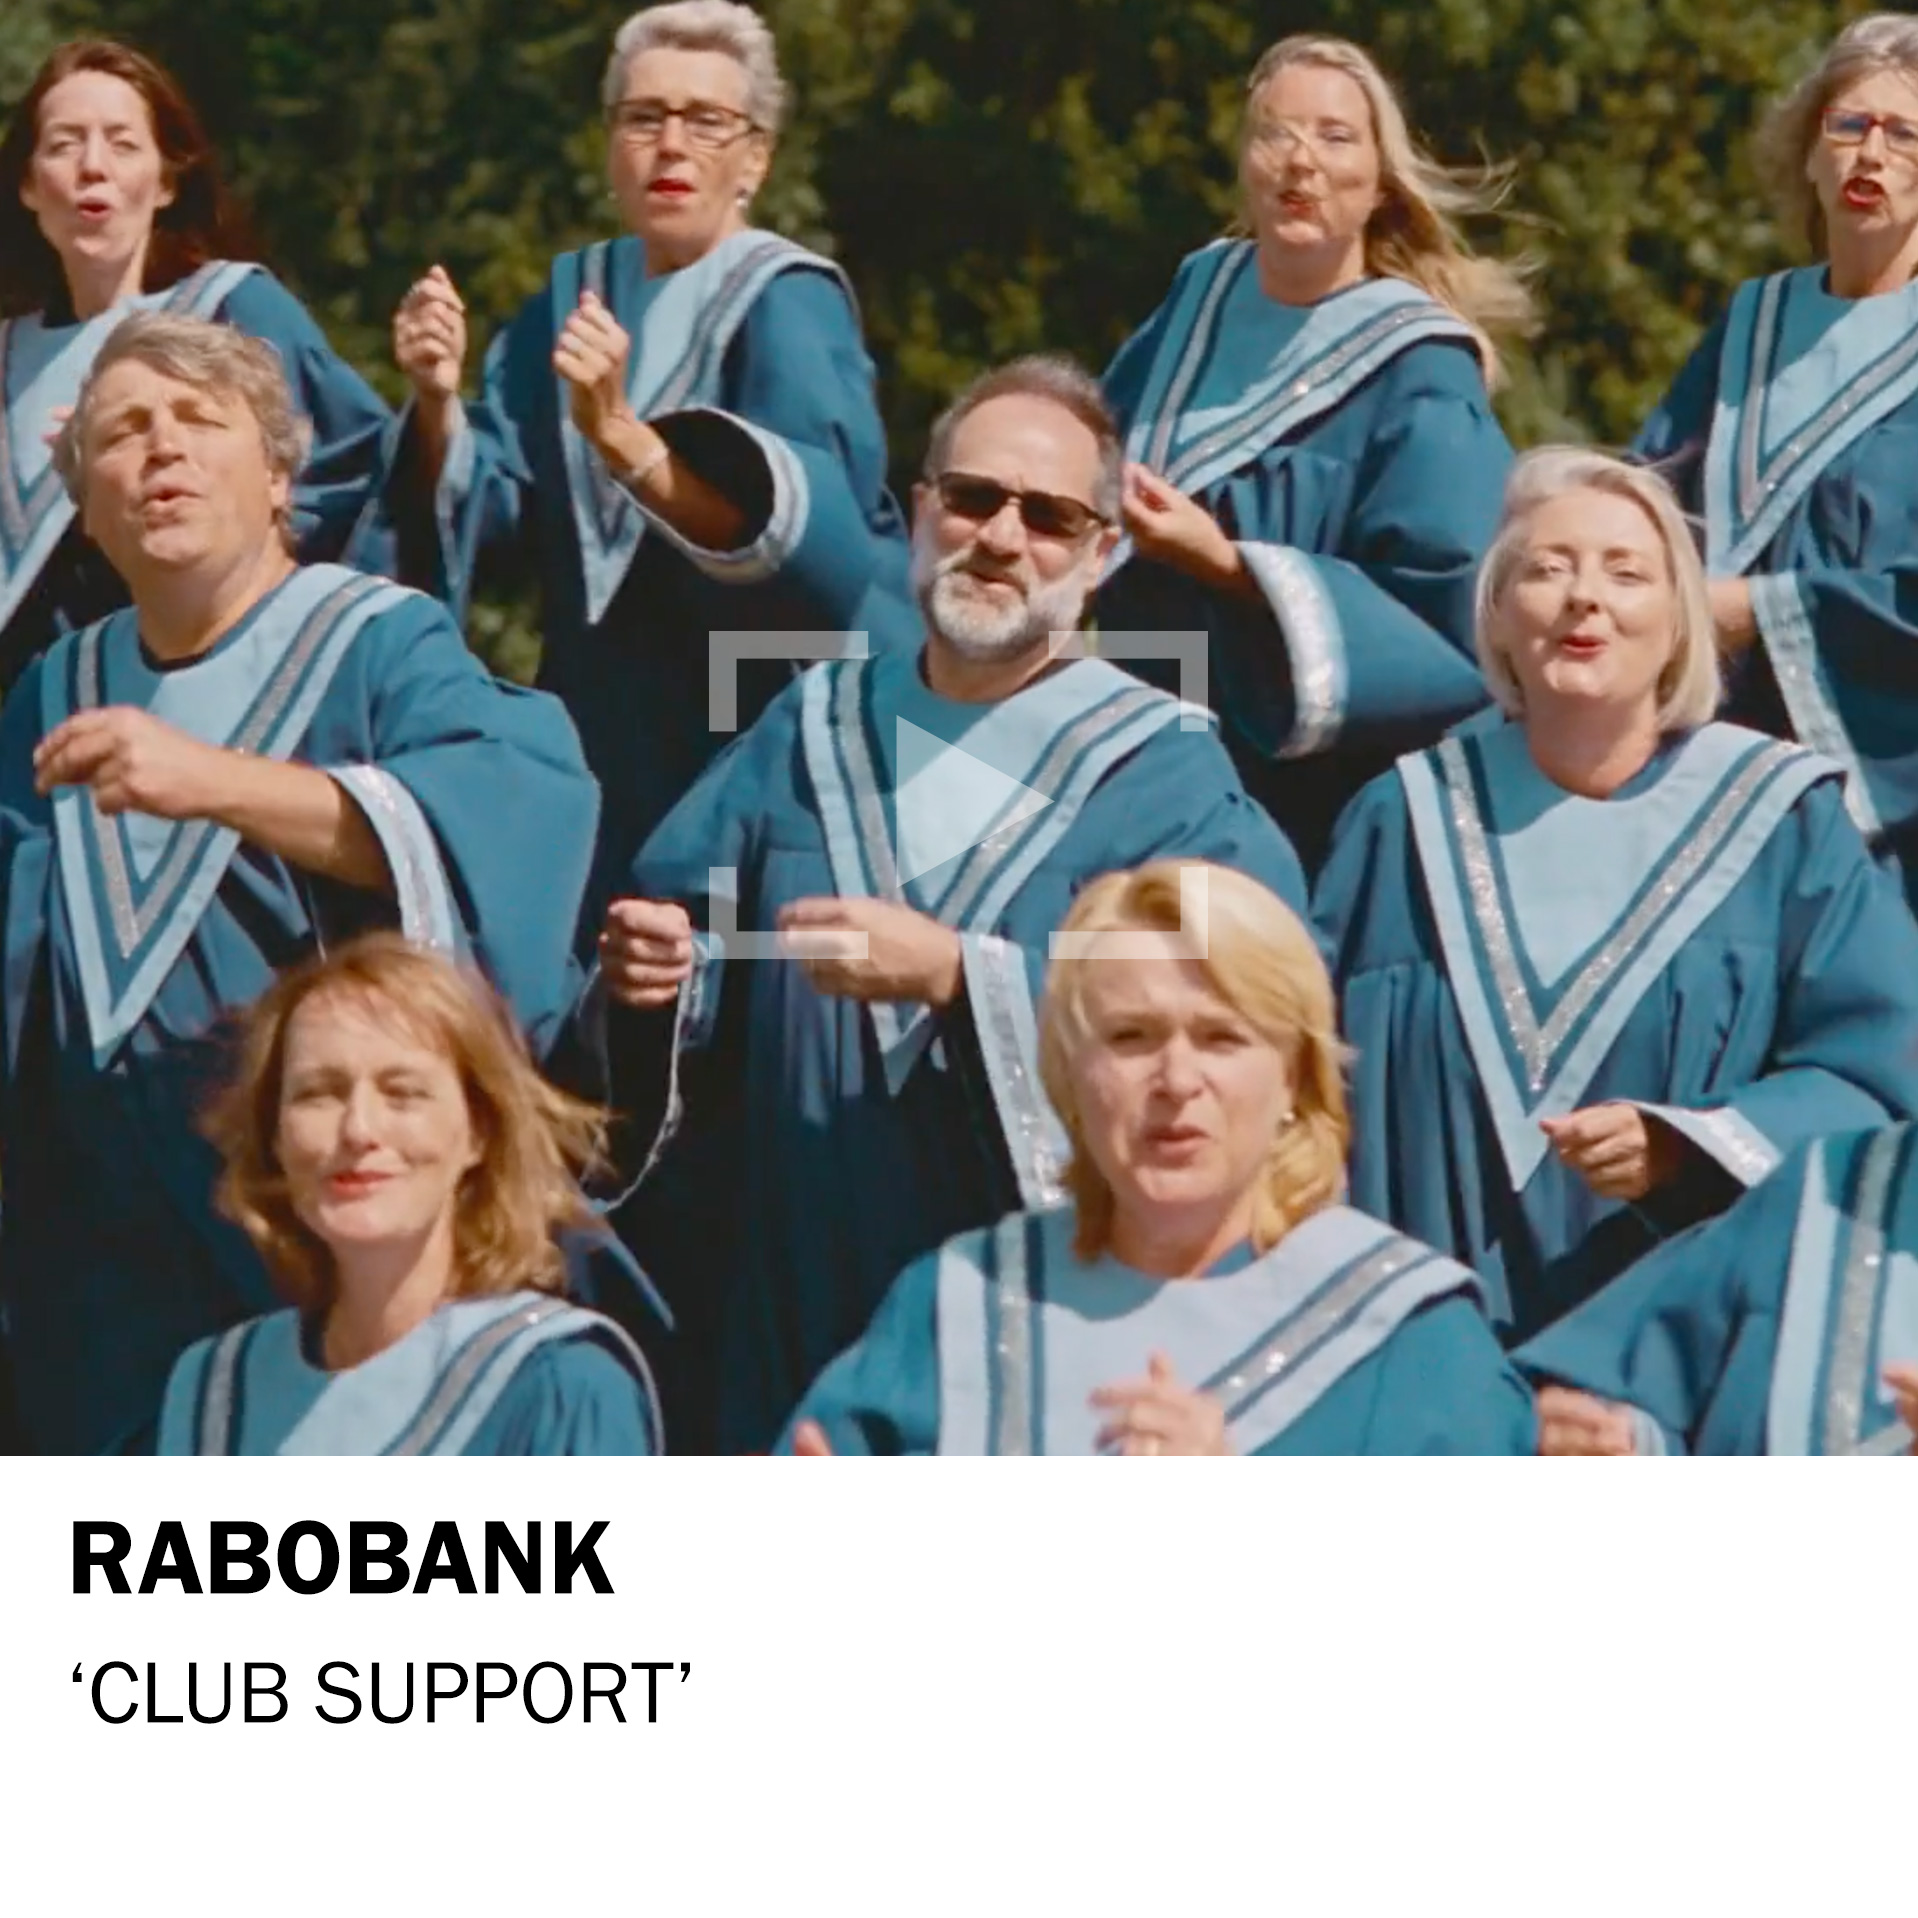 RABOBANK – Club support